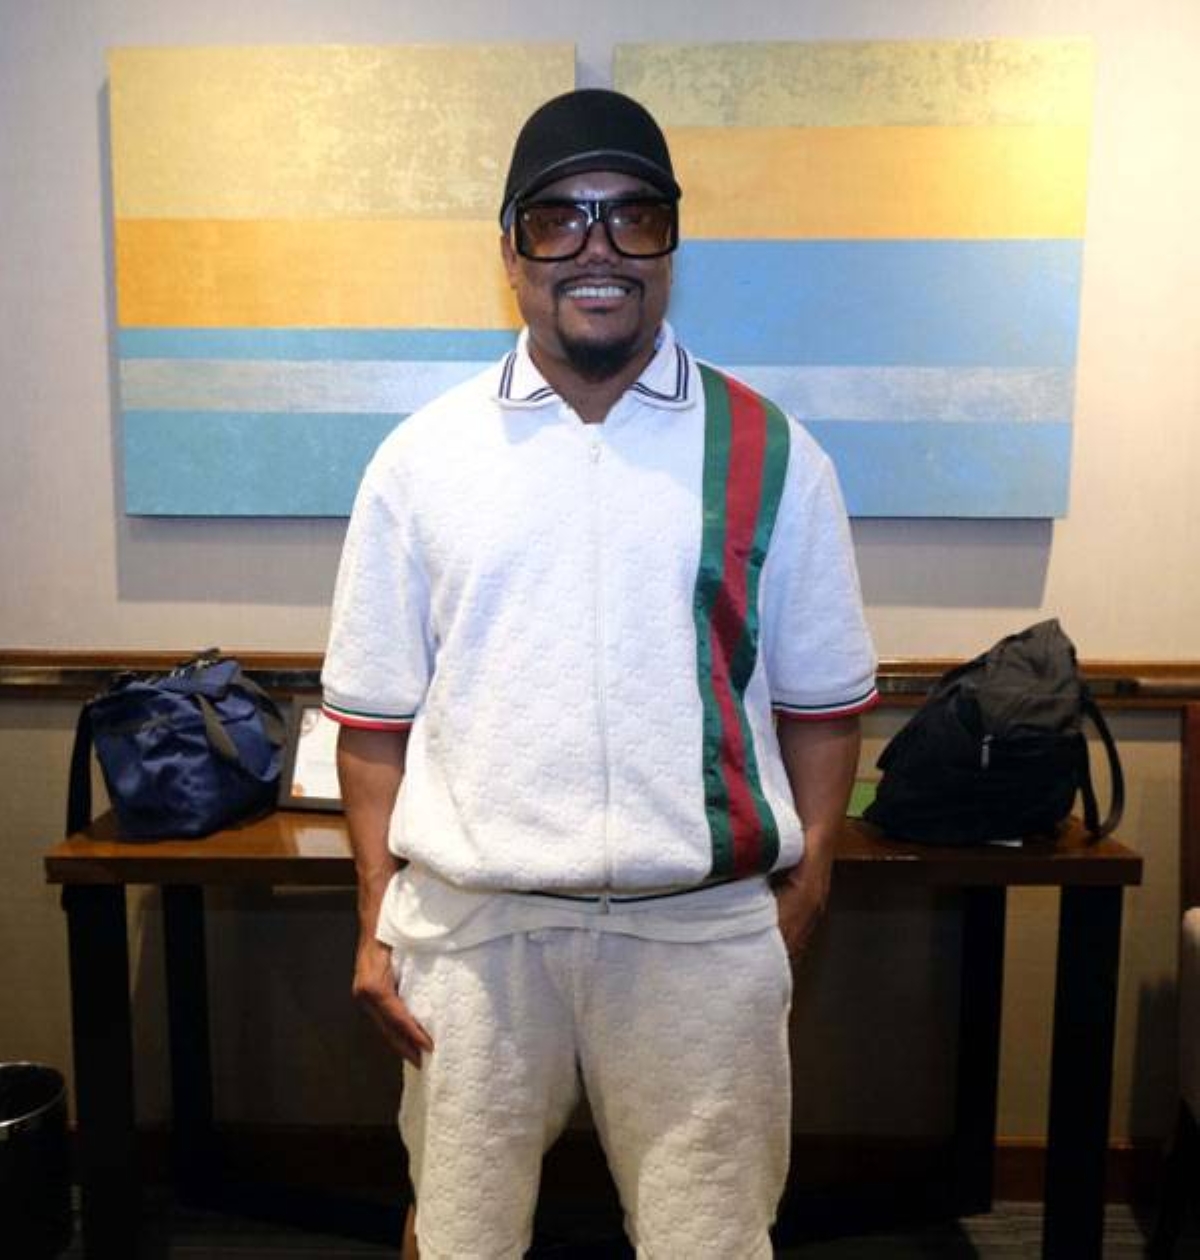 The Black Eyed Peas member is all praises for the Korean celebrity (below photo) who he often saw before when visiting Manila. INSTAGRAM PHOTOS/APLDEAP, DARAXXI